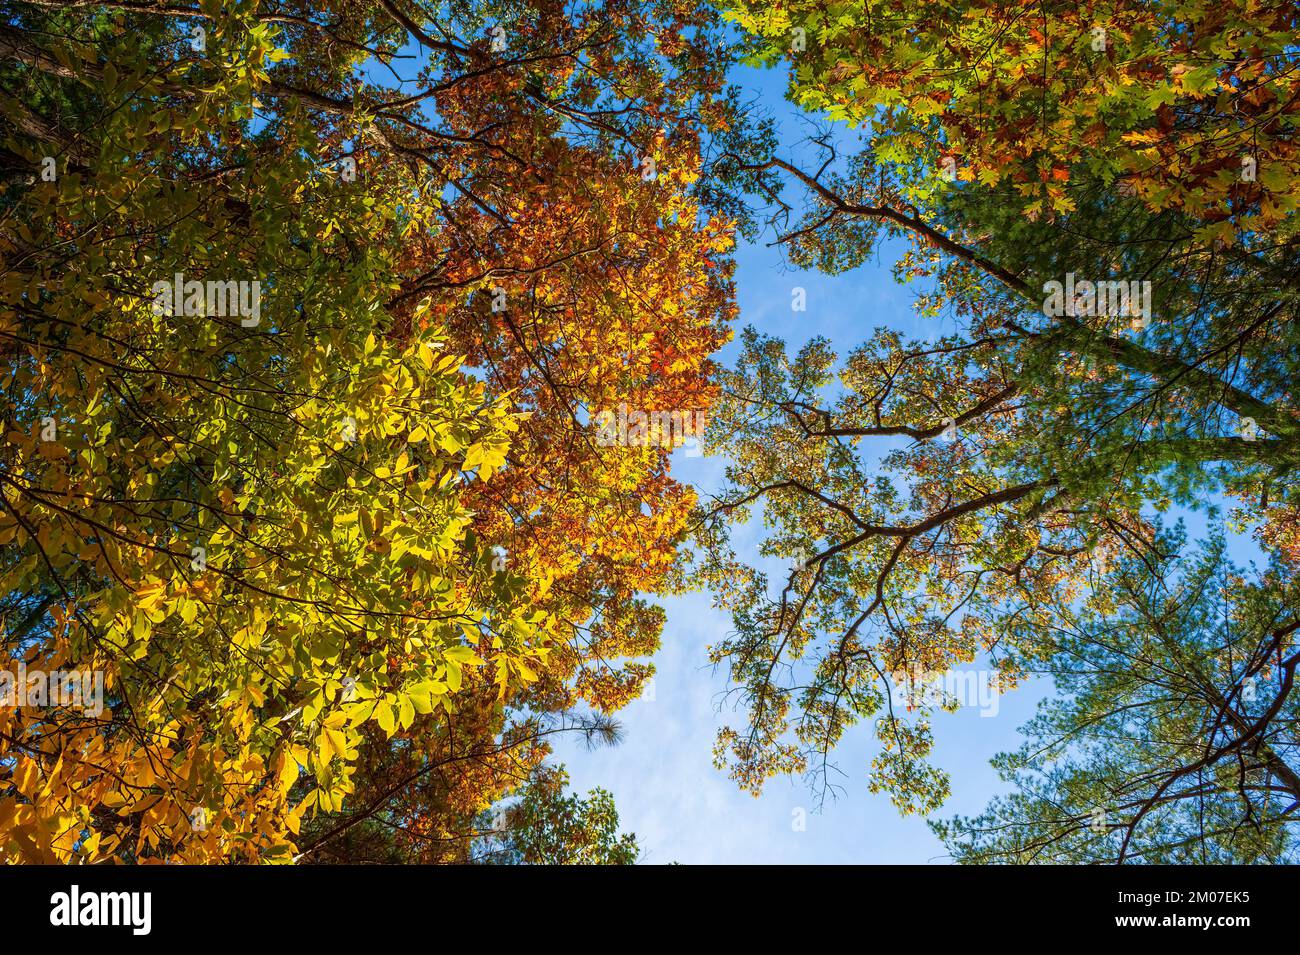 Canopies of white oak and American chestnut trees in fall colors. Peak fall foliage in New England. Assabet River National Wildlife Refuge, Sudbury MA Stock Photo